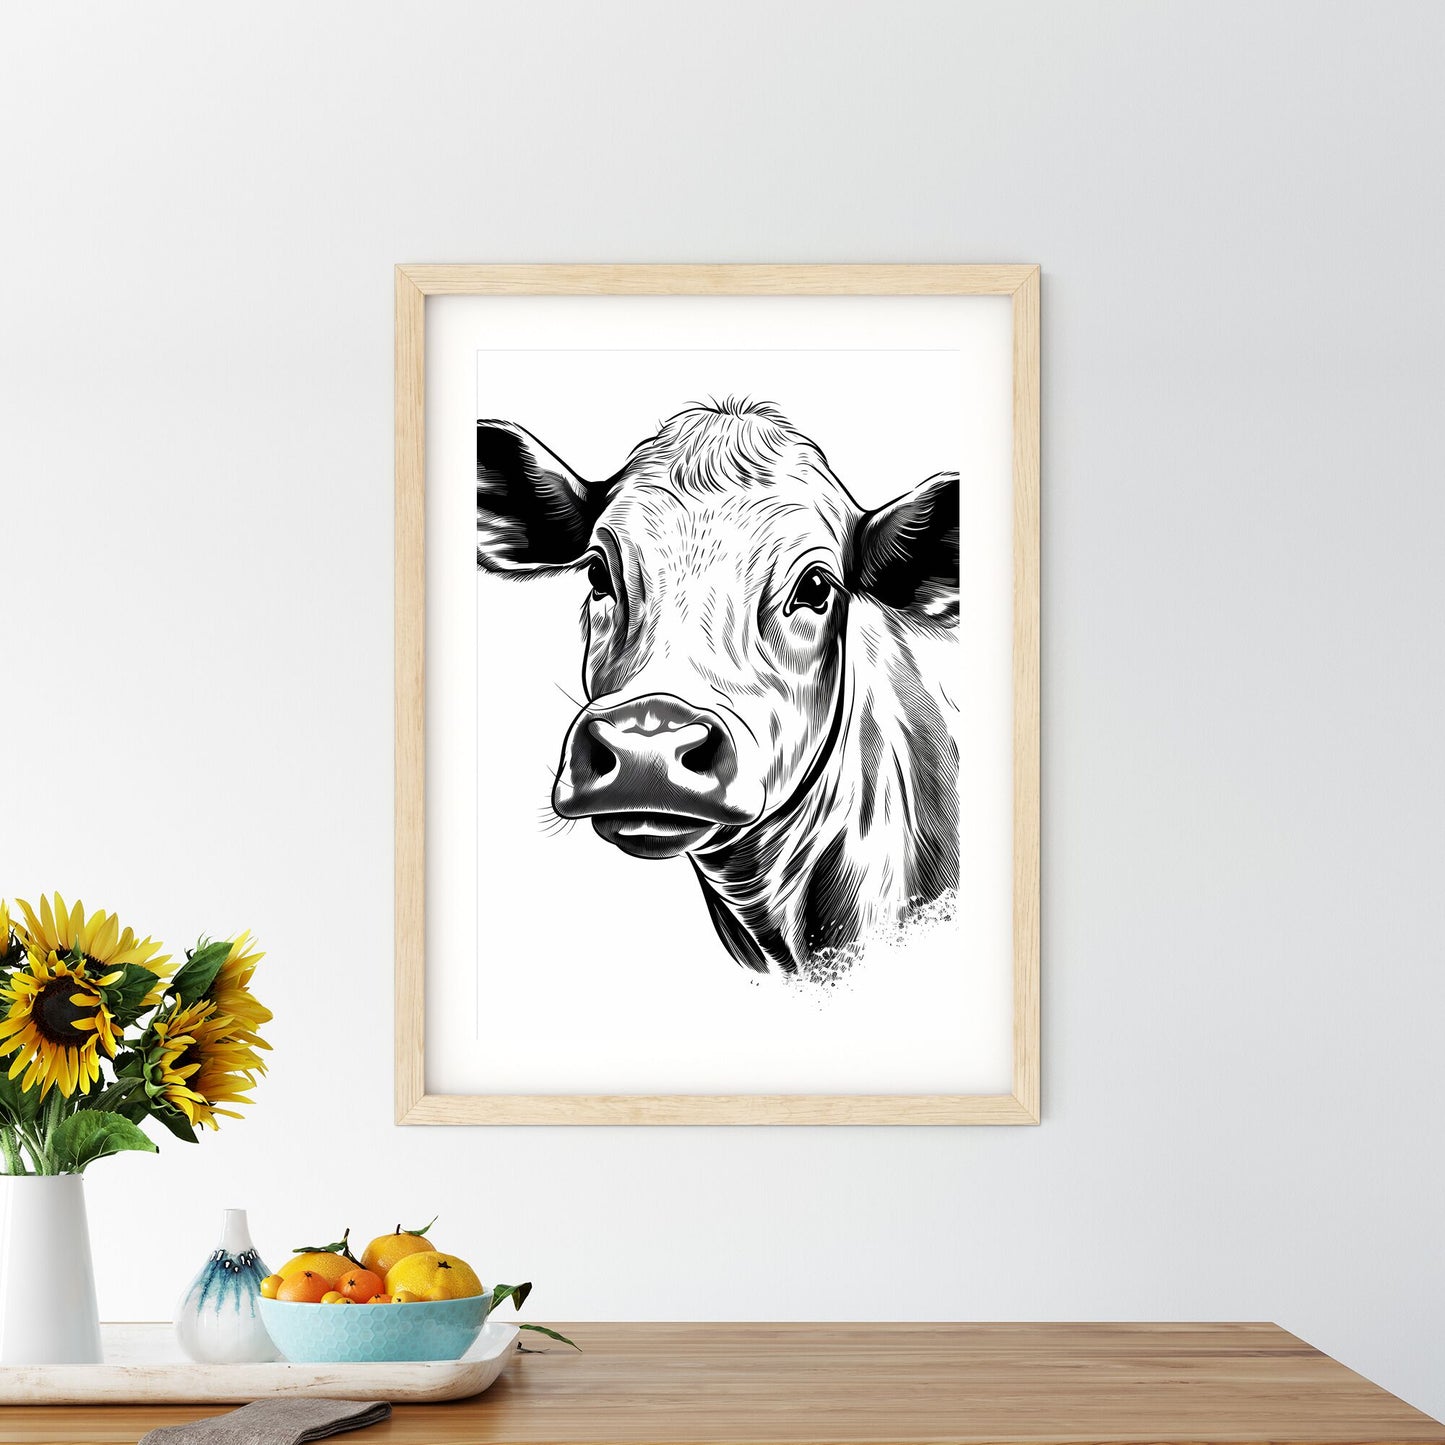 Cow Head With Ears And Nose Art Print Default Title